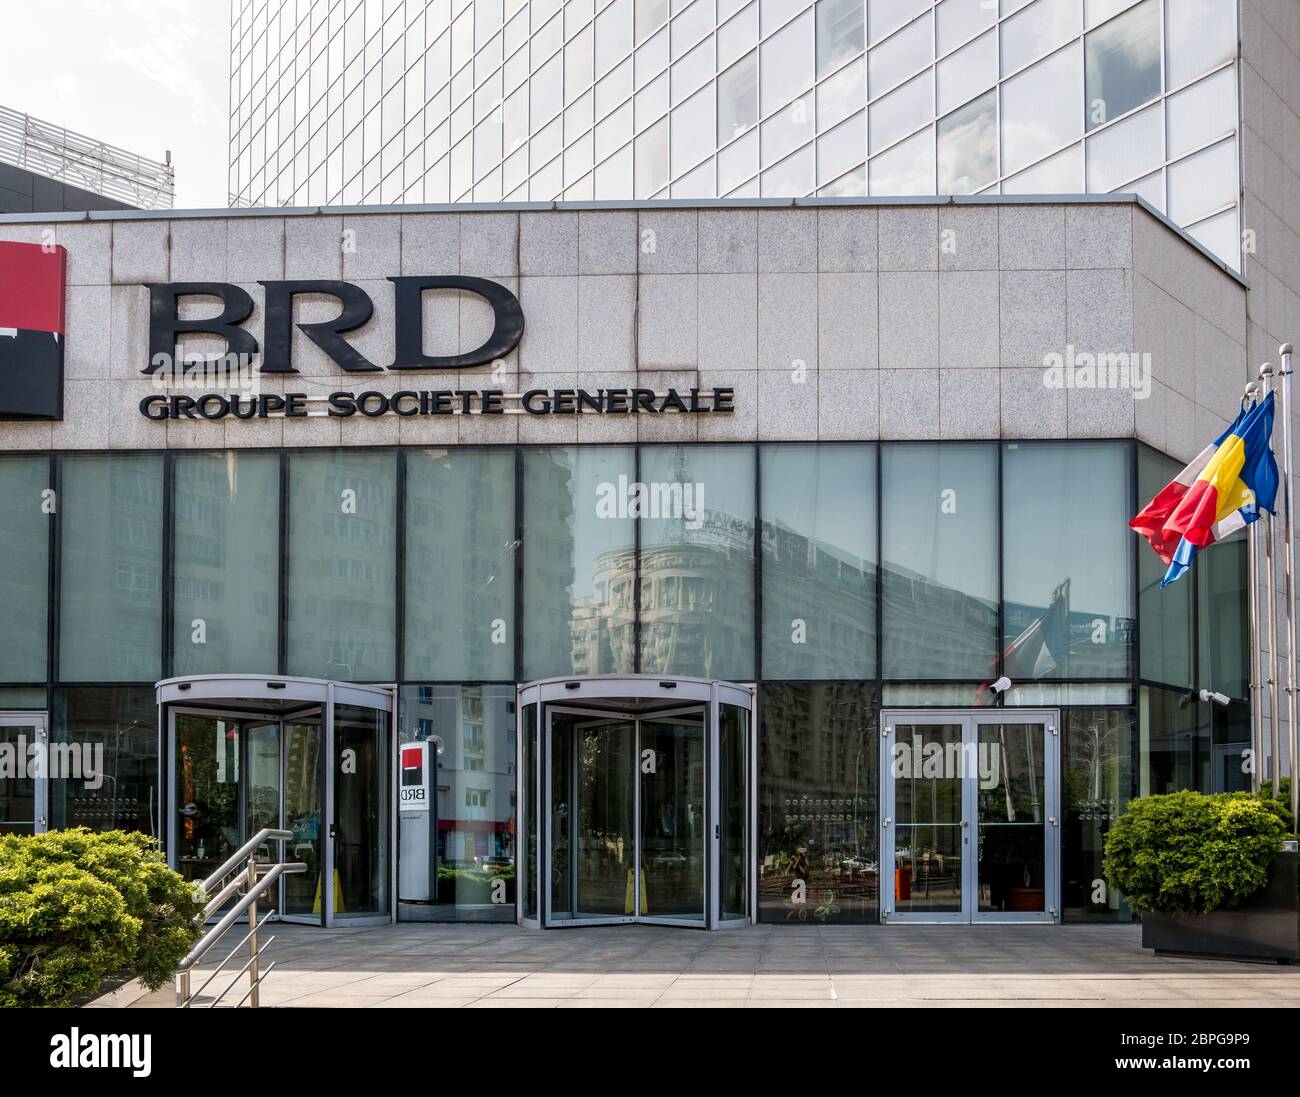 Bucharest/Romania - 05.16.2020: BRD Groupe Societe Generale (GSG) logo at the entrance of the company's headquarters in Bucharest. Stock Photo